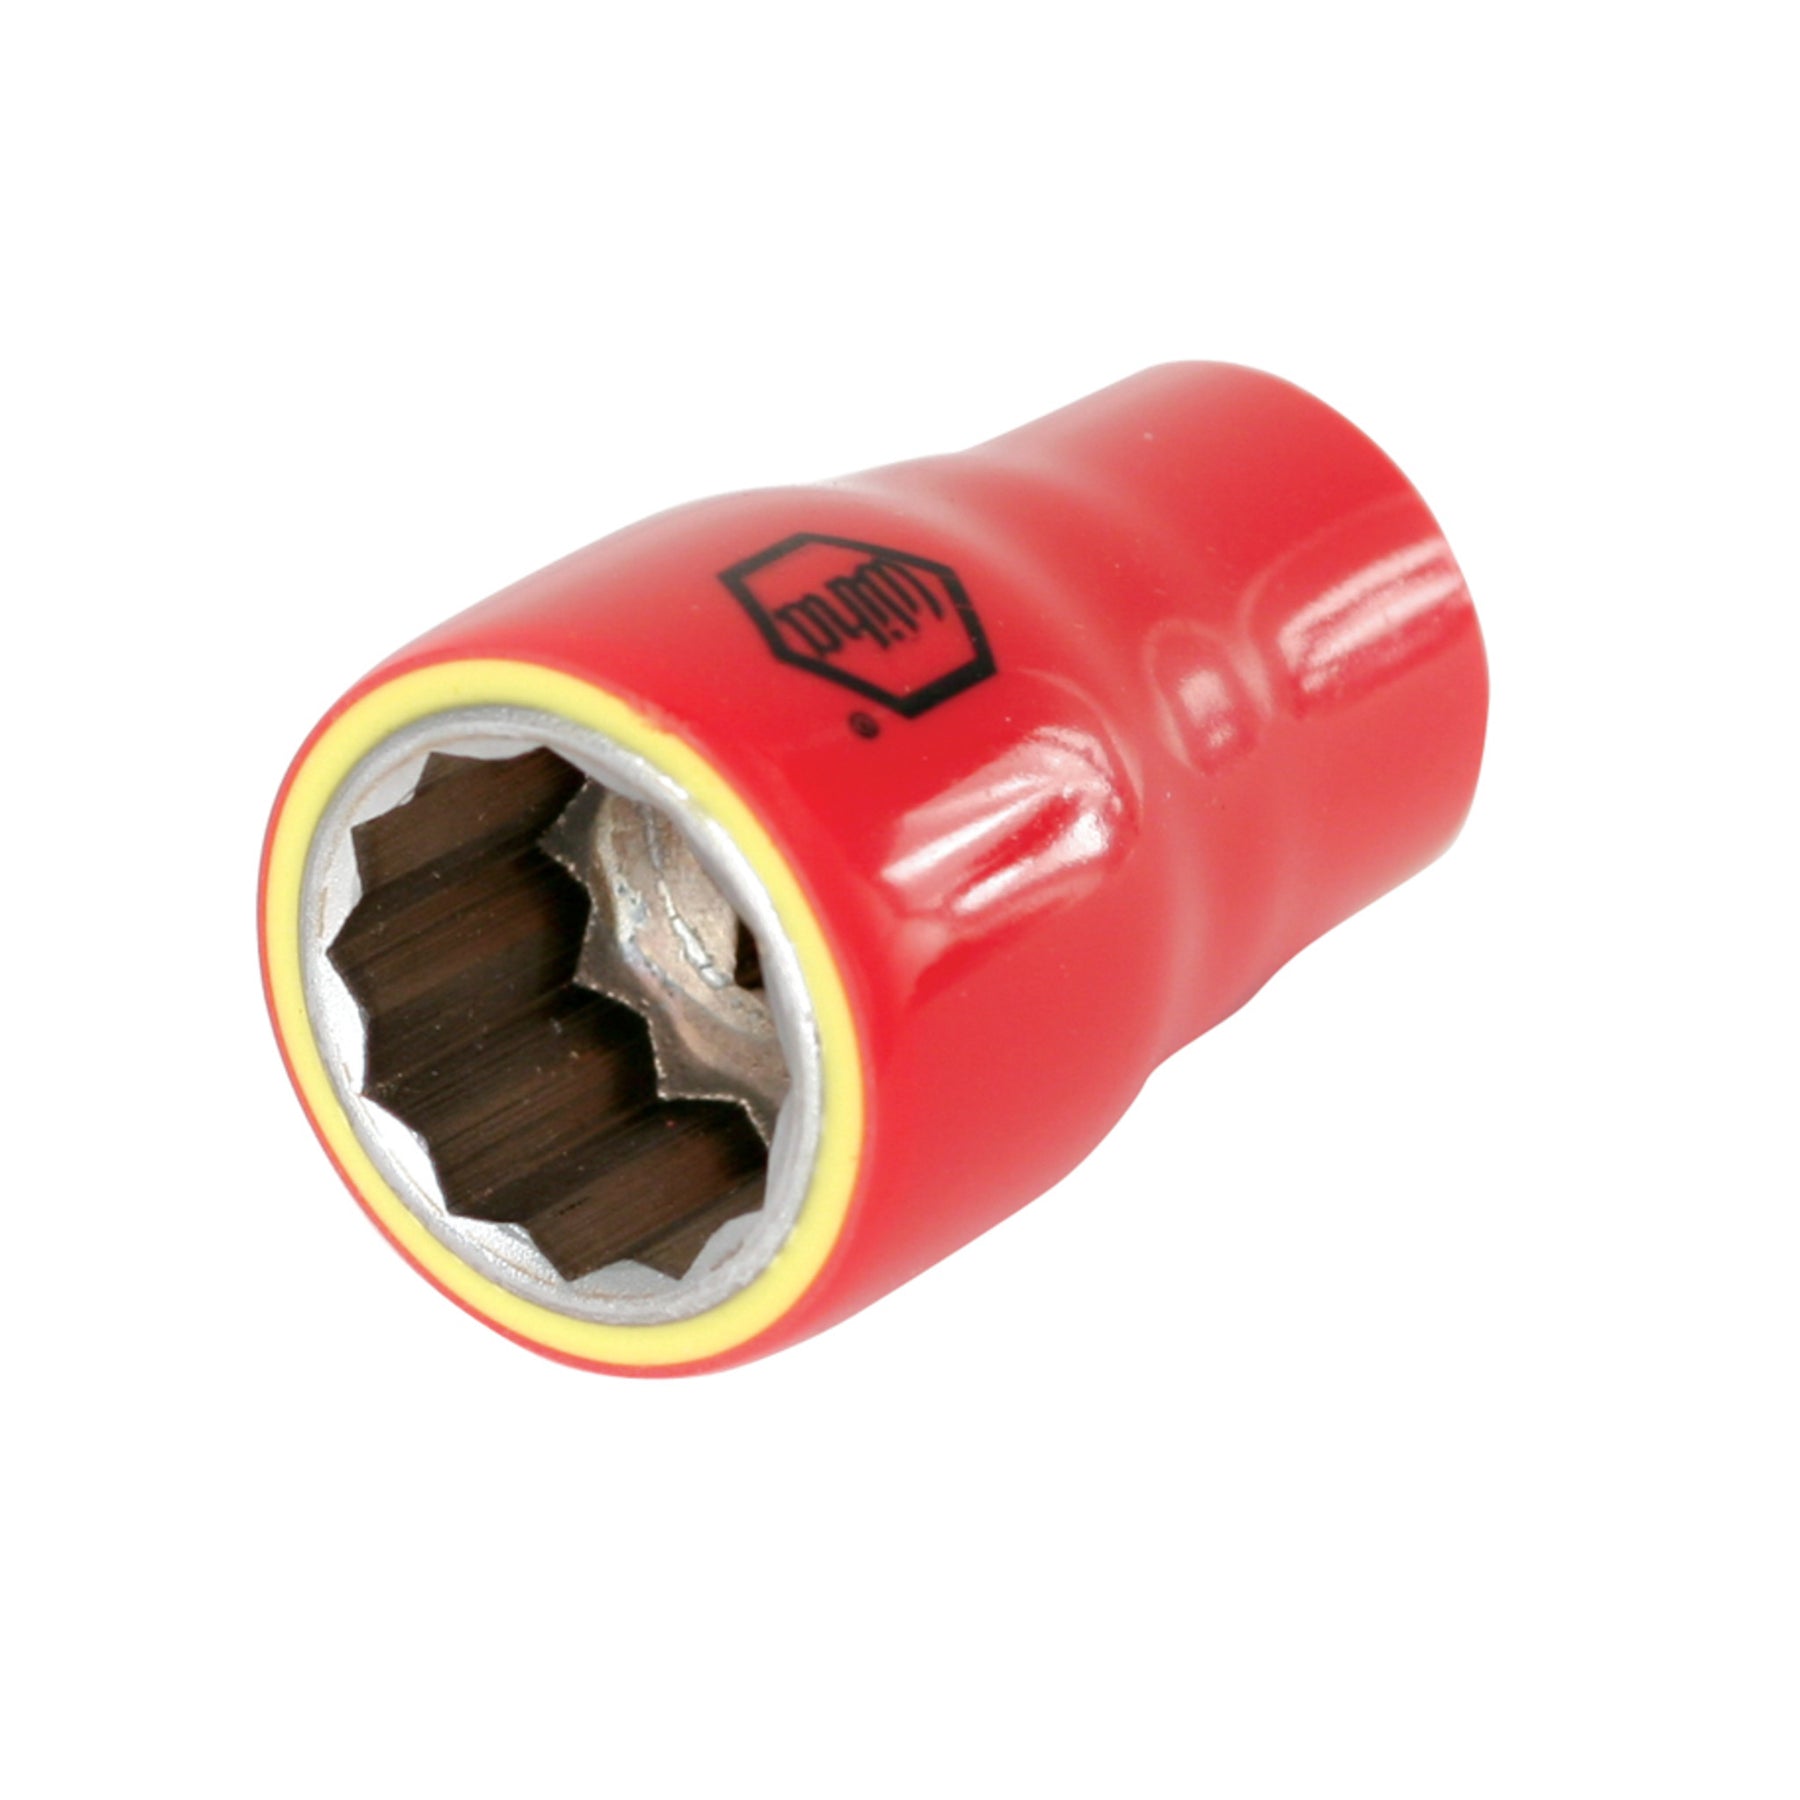 Insulated Socket 1/2" Drive 30mm